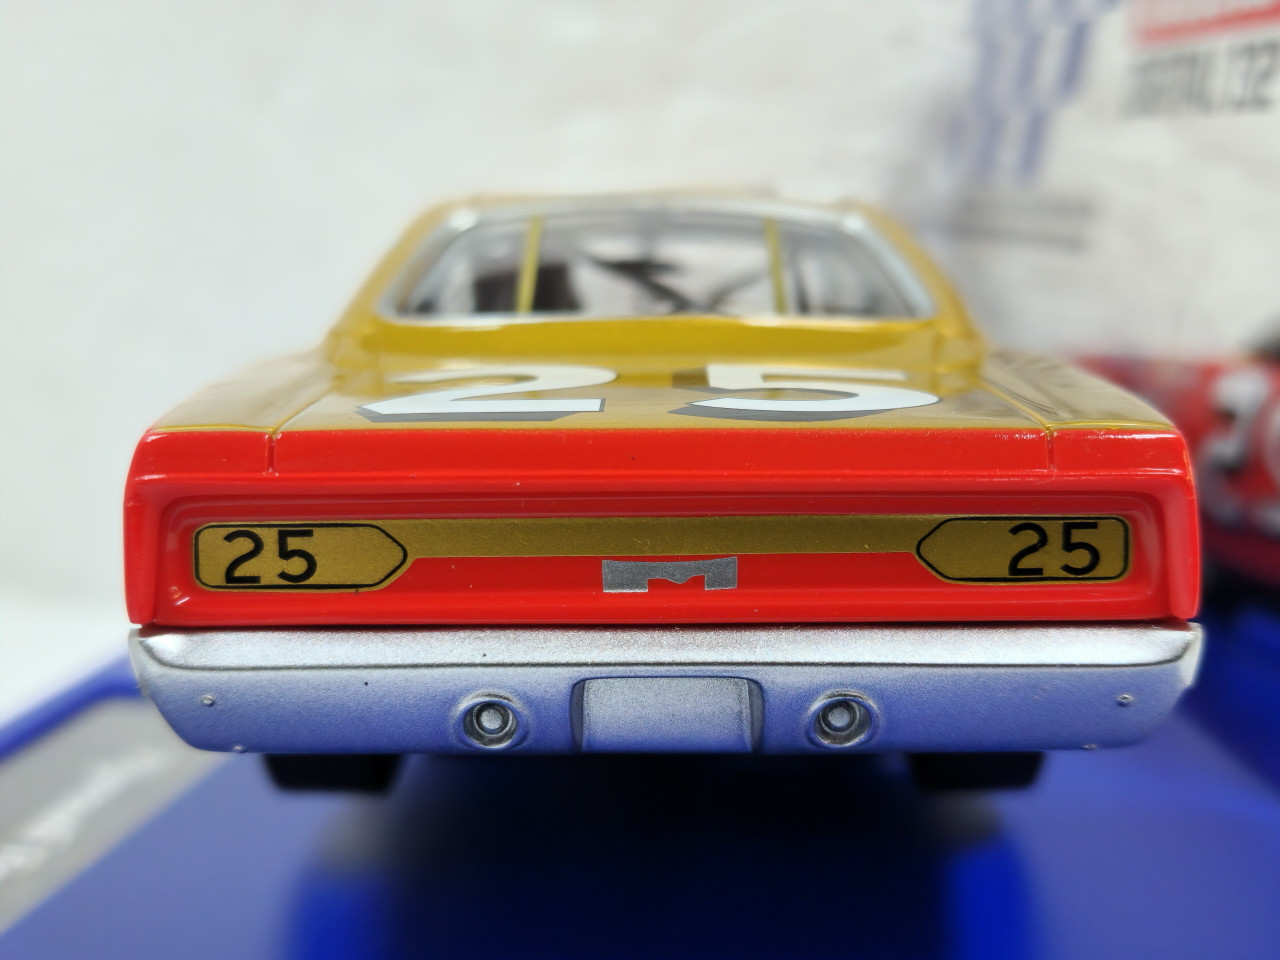  Carrera 31059 Plymouth Roadrunner No.25 1:32 Scale Digital Slot  Car Racing Vehicle Digital Slot Car Race Tracks : Toys & Games